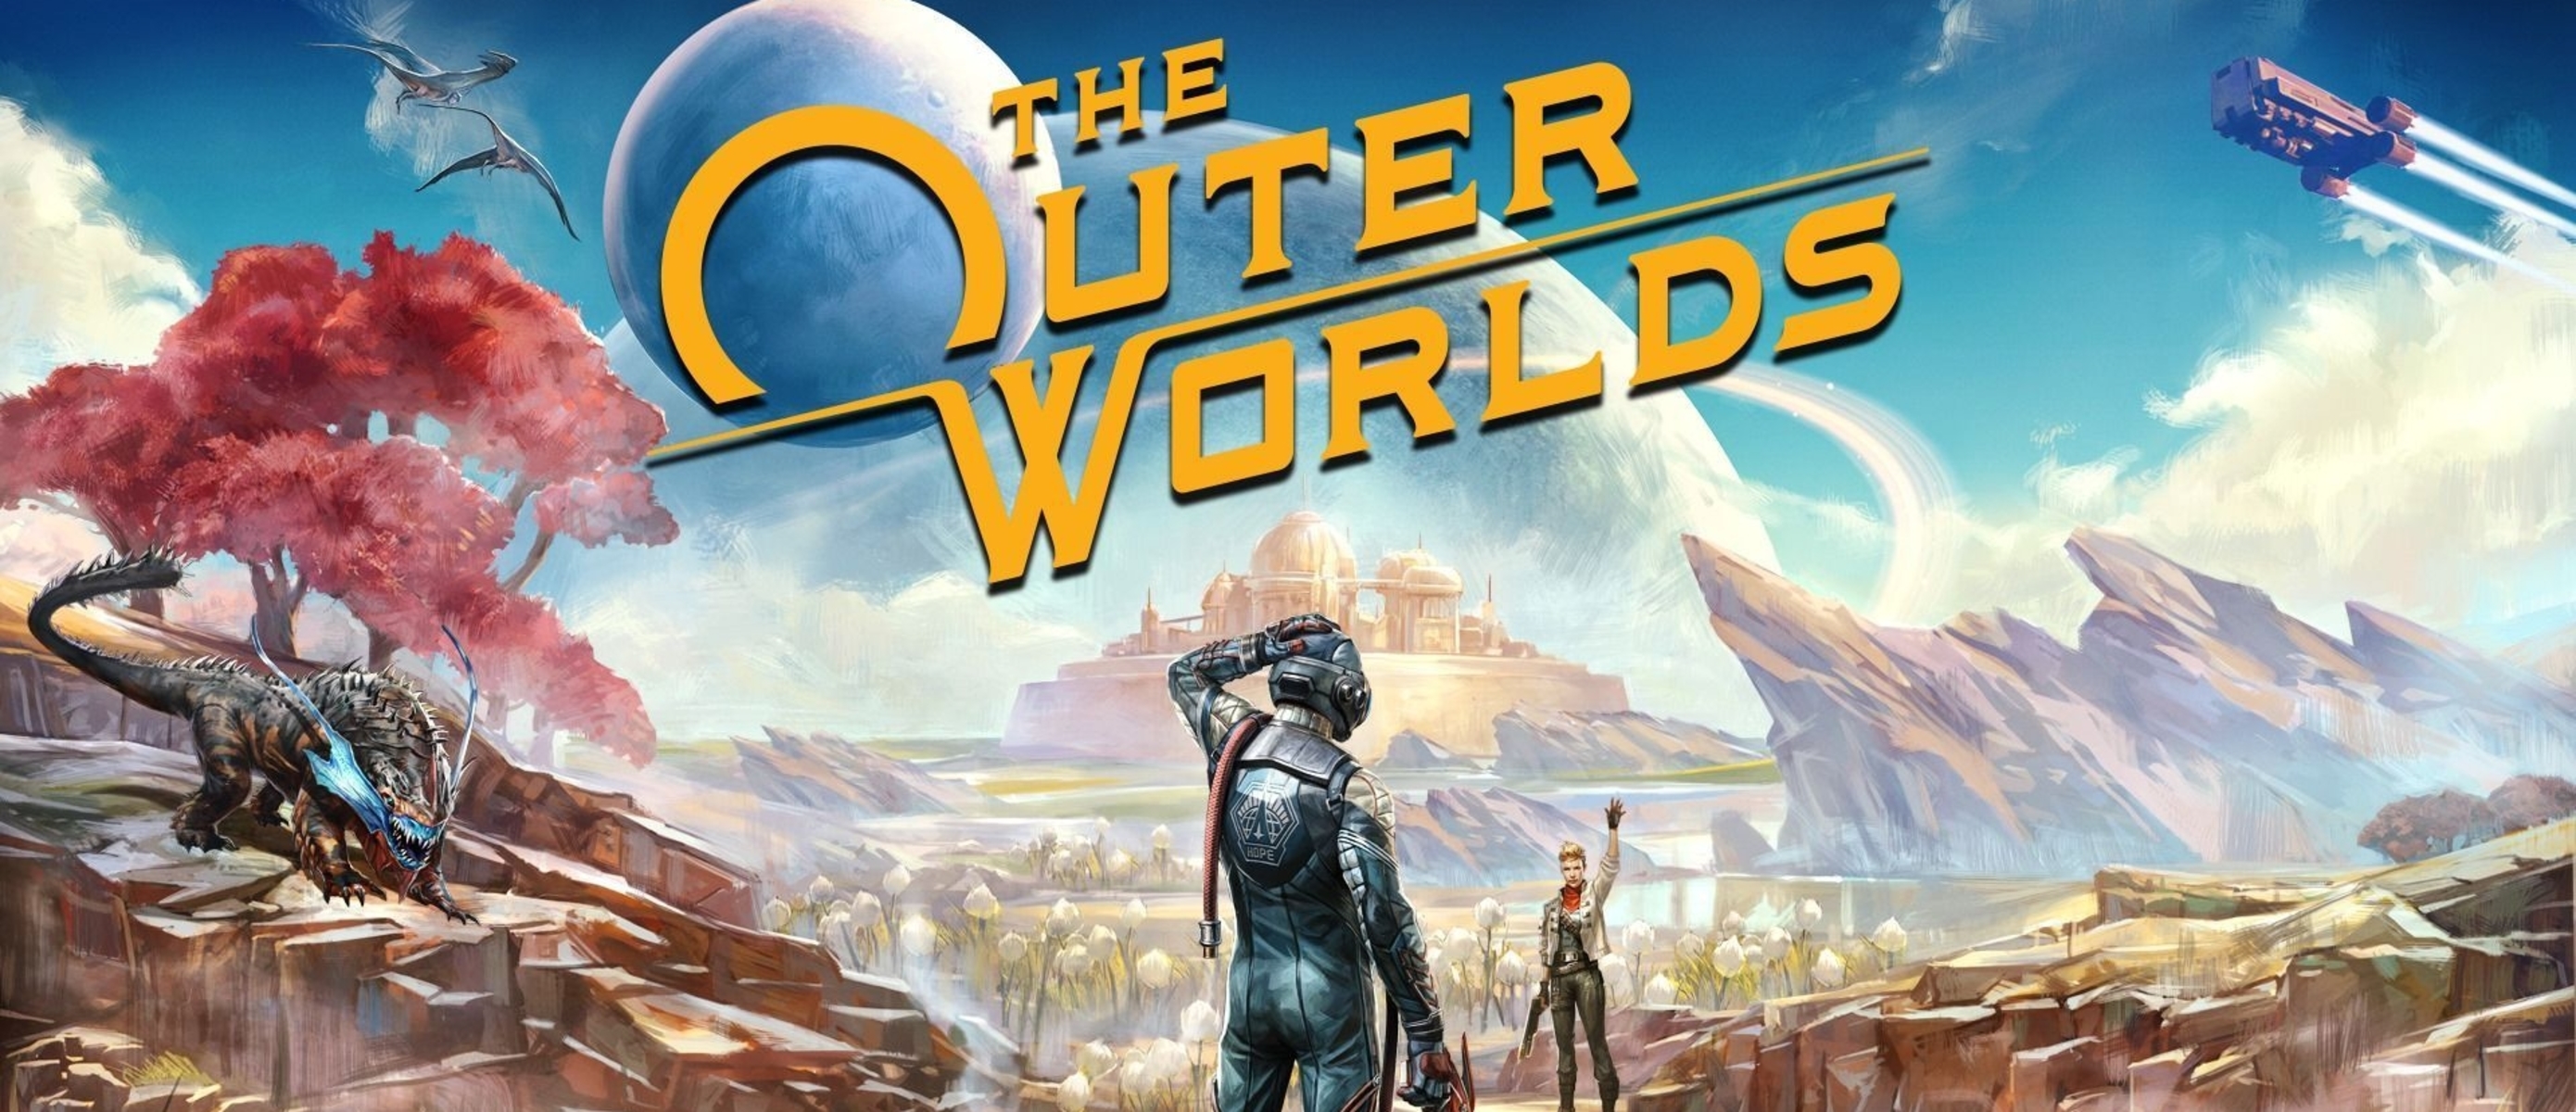 5 worlds book 3. The Outer Worlds геймплей. The Outer Worlds Obsidian Entertainment. Наследники Fallout. The Outer Worlds Gameplay.